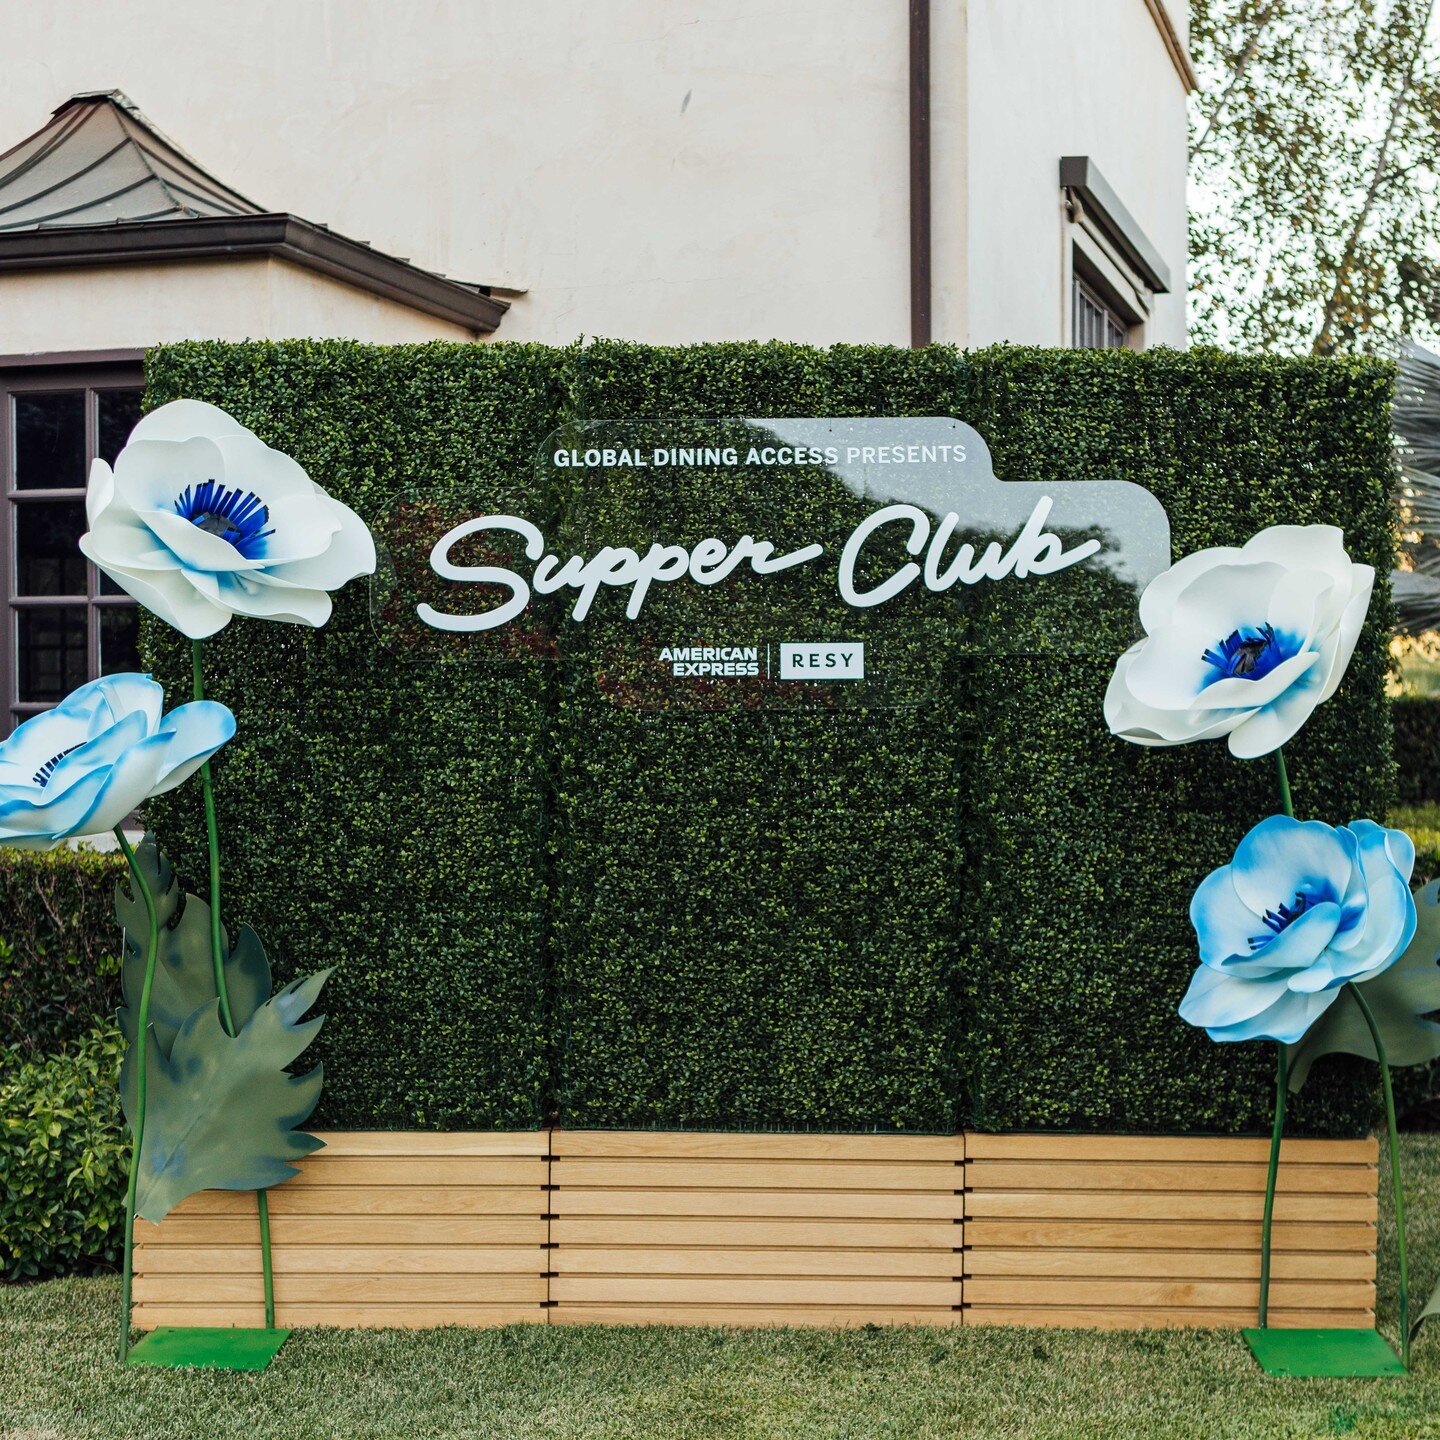 8.27.22 - Global Dining Access by Resy Presents: Supper Club in Beverly Hills

We recently worked with Resy and American Express to bring together Global Dining Access members for an intimate dinner series at a private estate in Beverly Hills. A coll